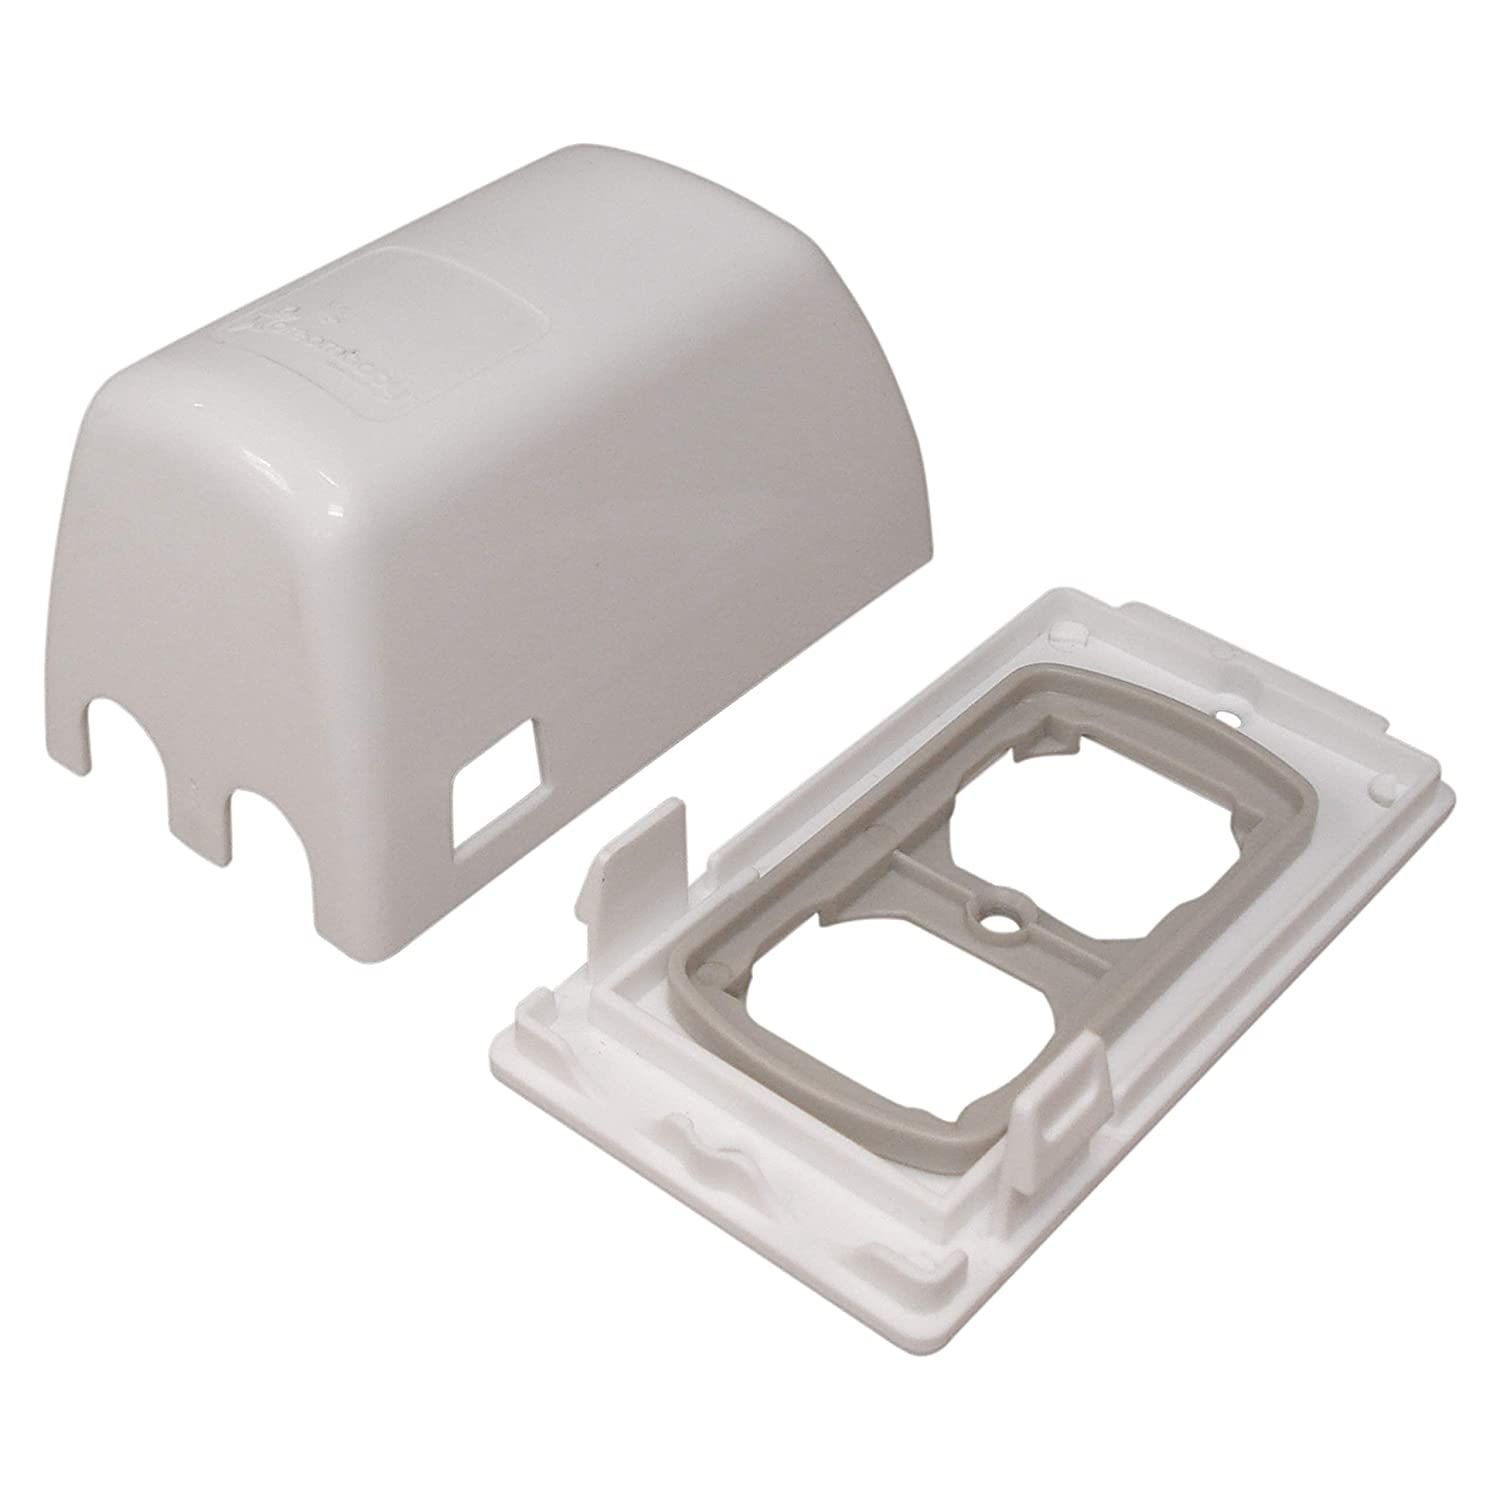 Dreambaby Outlet Plug Cover box contents